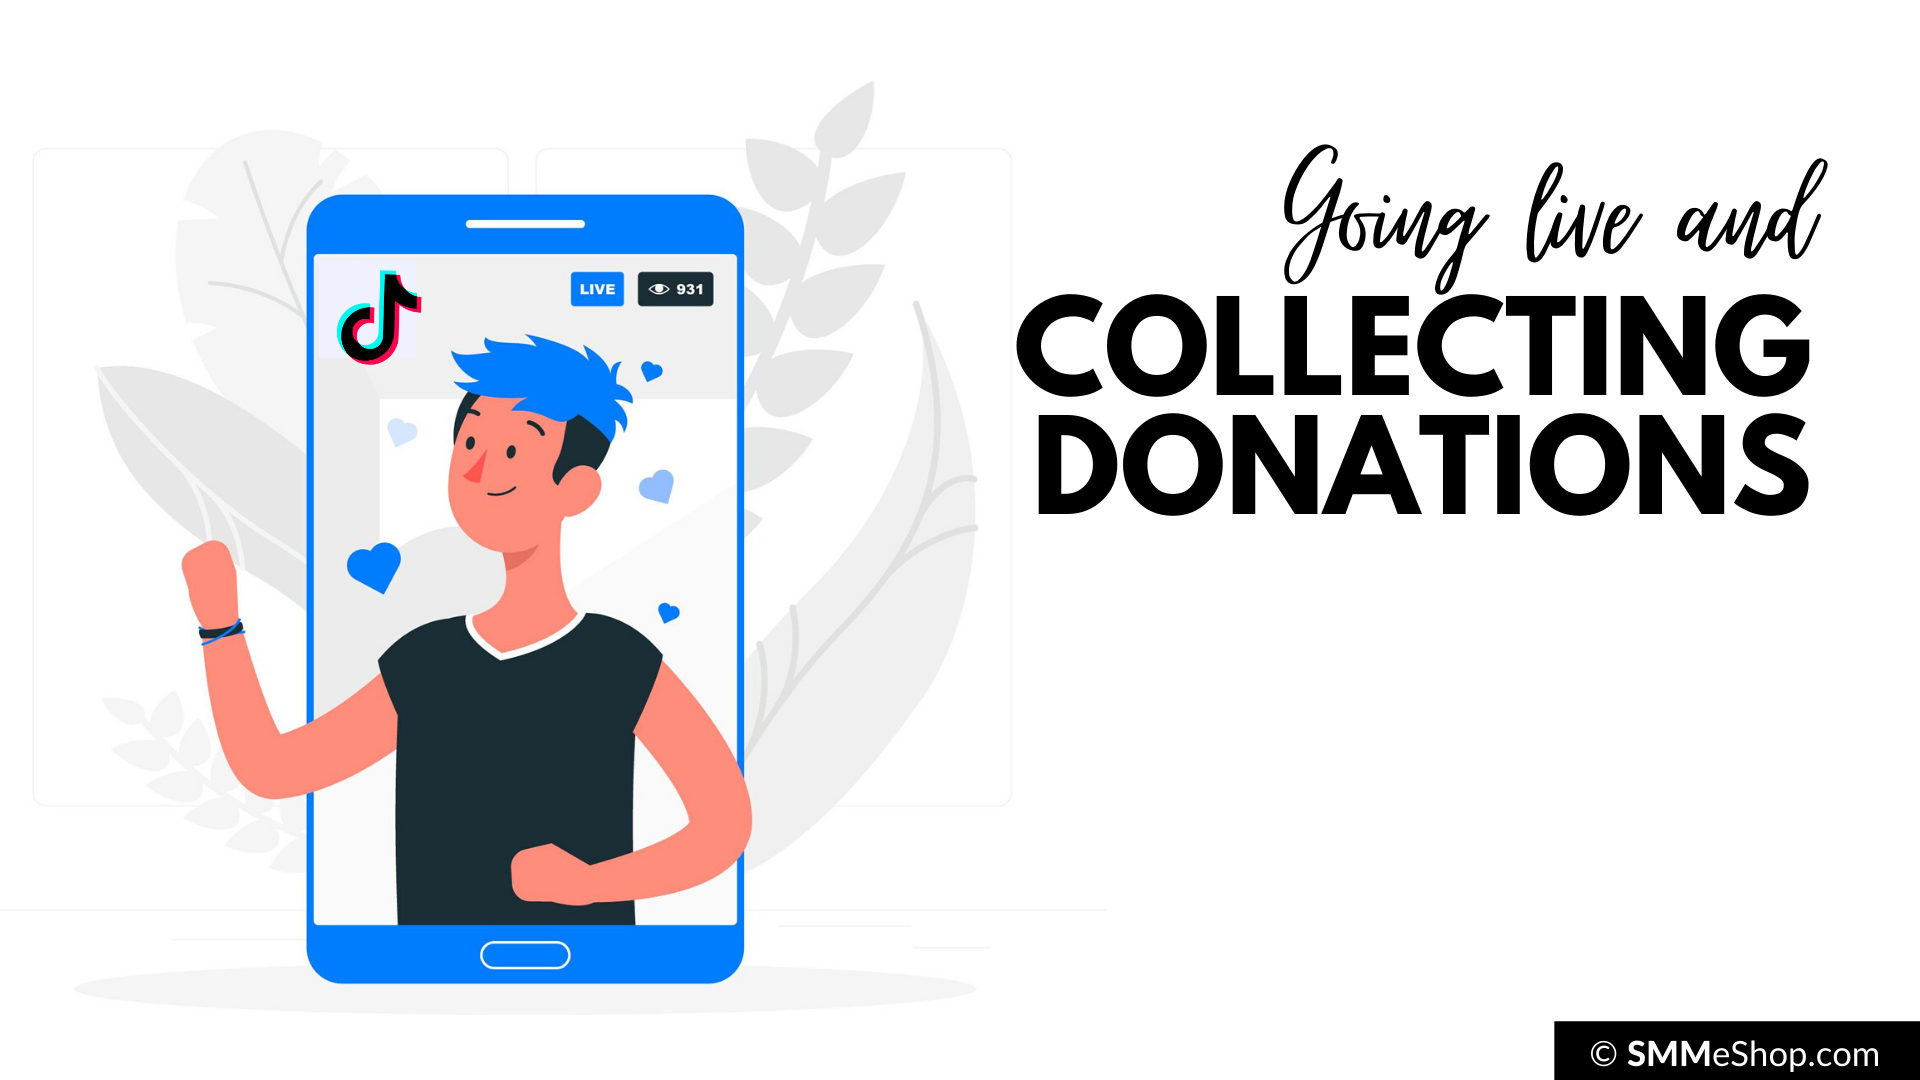 money from TikTok is going Live and Collecting Donations from viewers